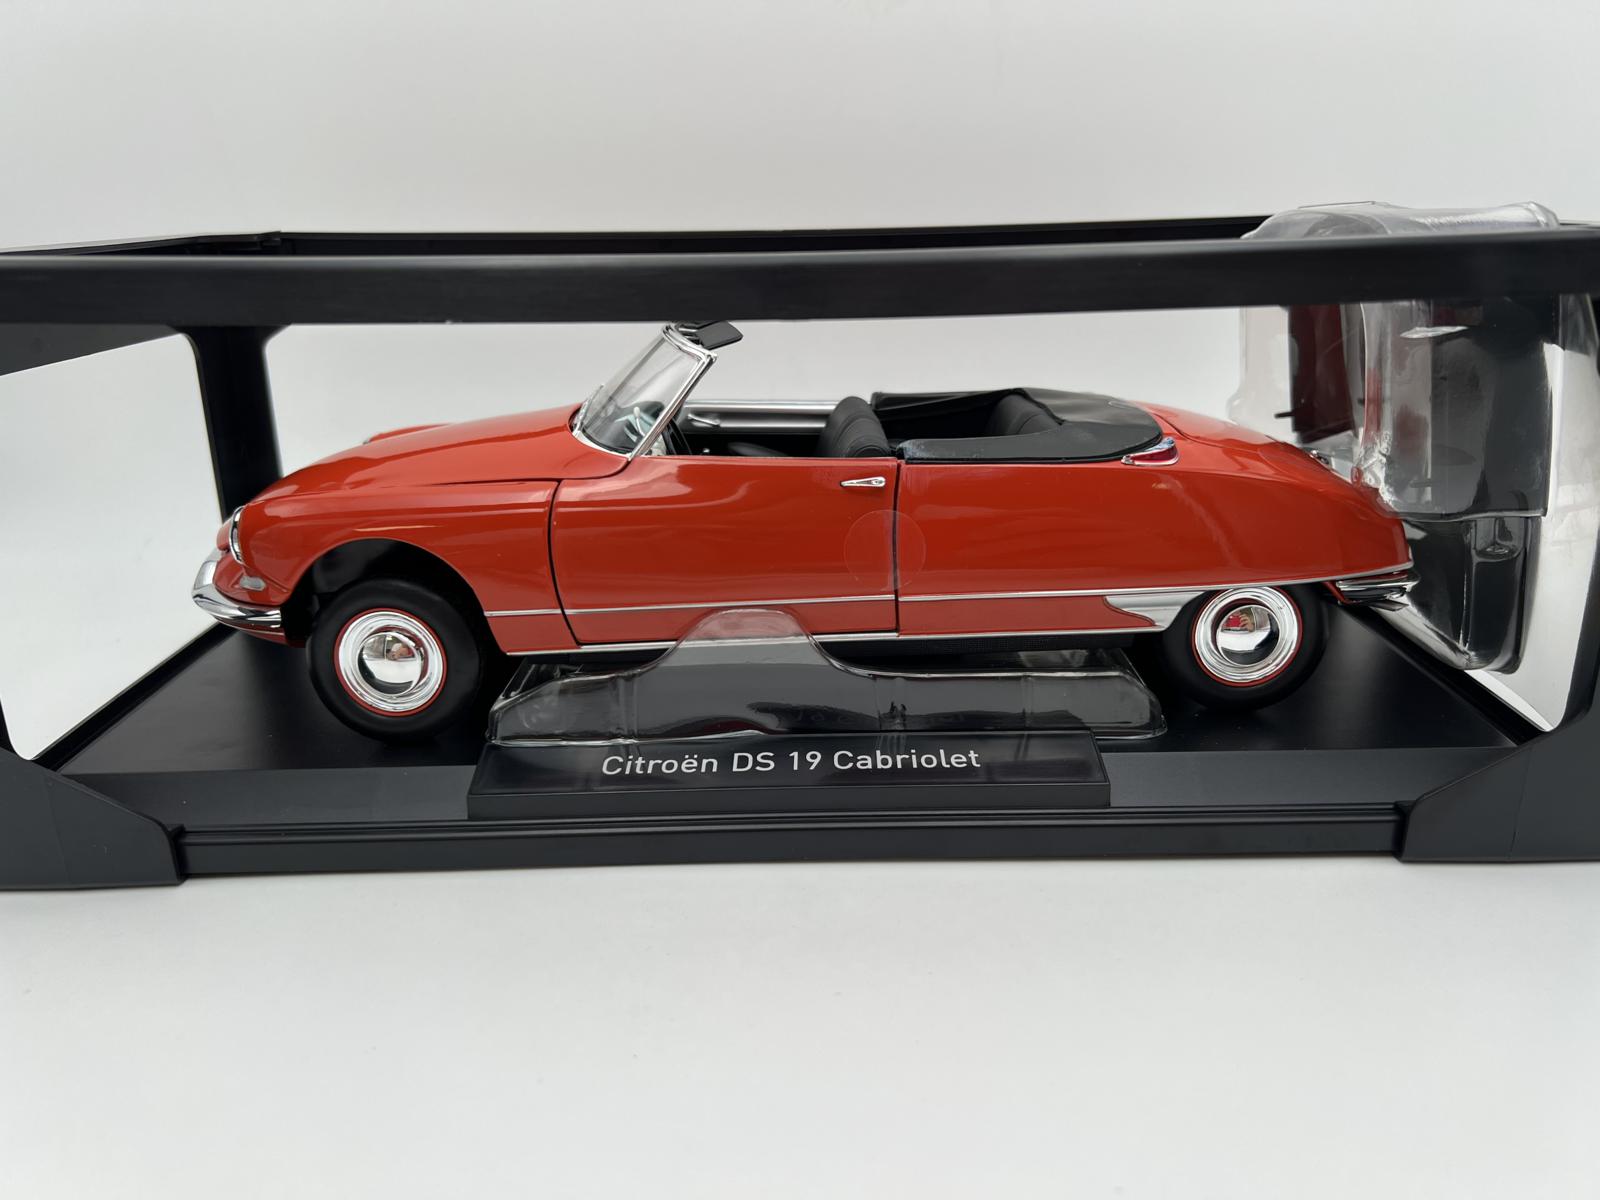 NOREV 1:18 CITROEN DS 19 CABRIOLET 1961 ROJO CORAL - AG TOY CARS